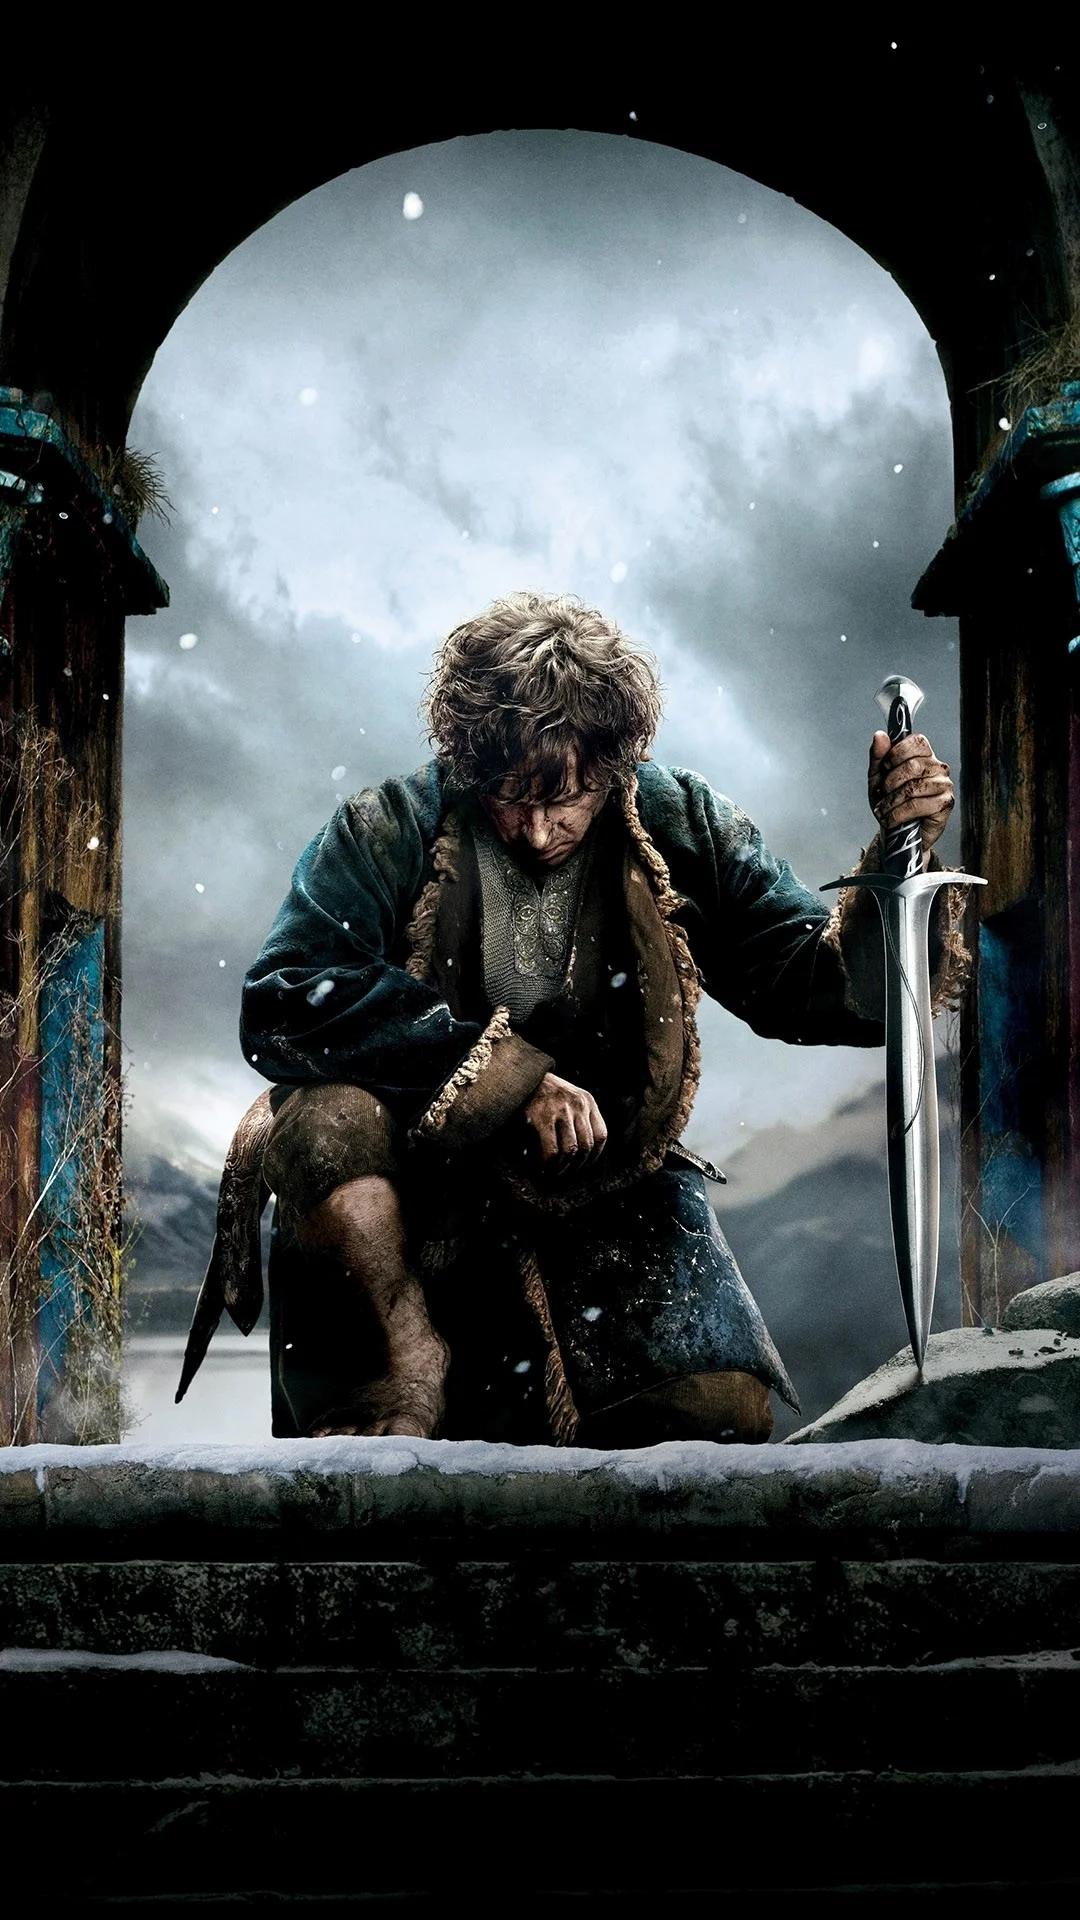 Bilbo with a sword in The Hobbit: The Desolation of Smaug Wallpaper